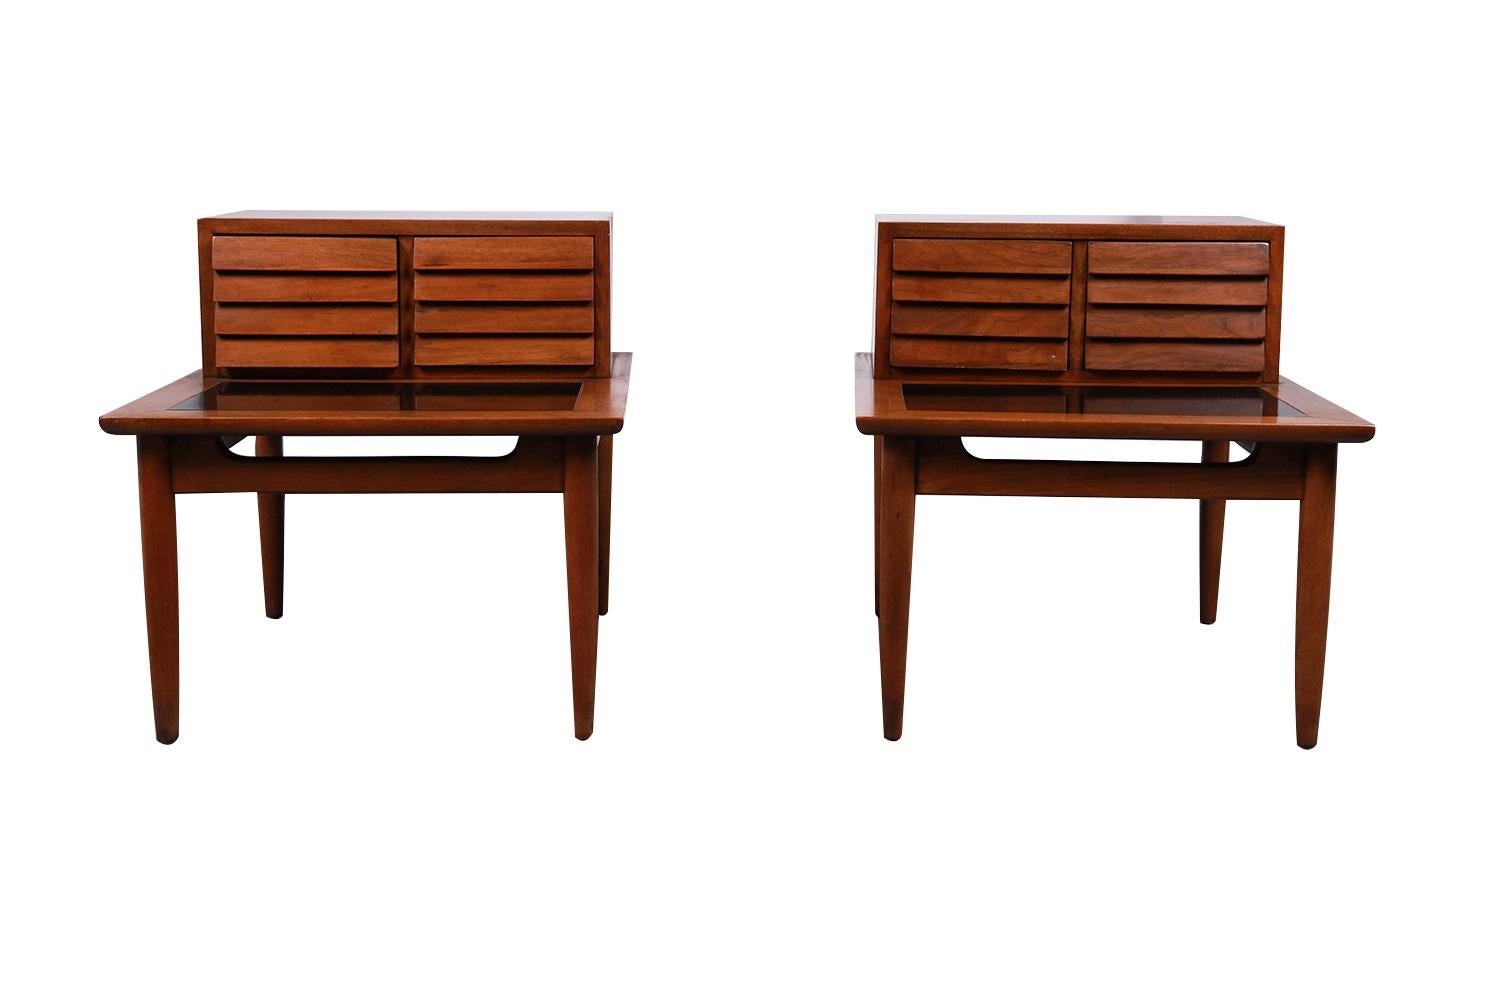 Striking pair of architectural Mid-Century Modern two-tier walnut nightstands or end tables by American of Martinsville, circa 1960's. “Dania” line, designed by Merton Gershun, is one of the most esteemed furniture producers of the Mid-century era.